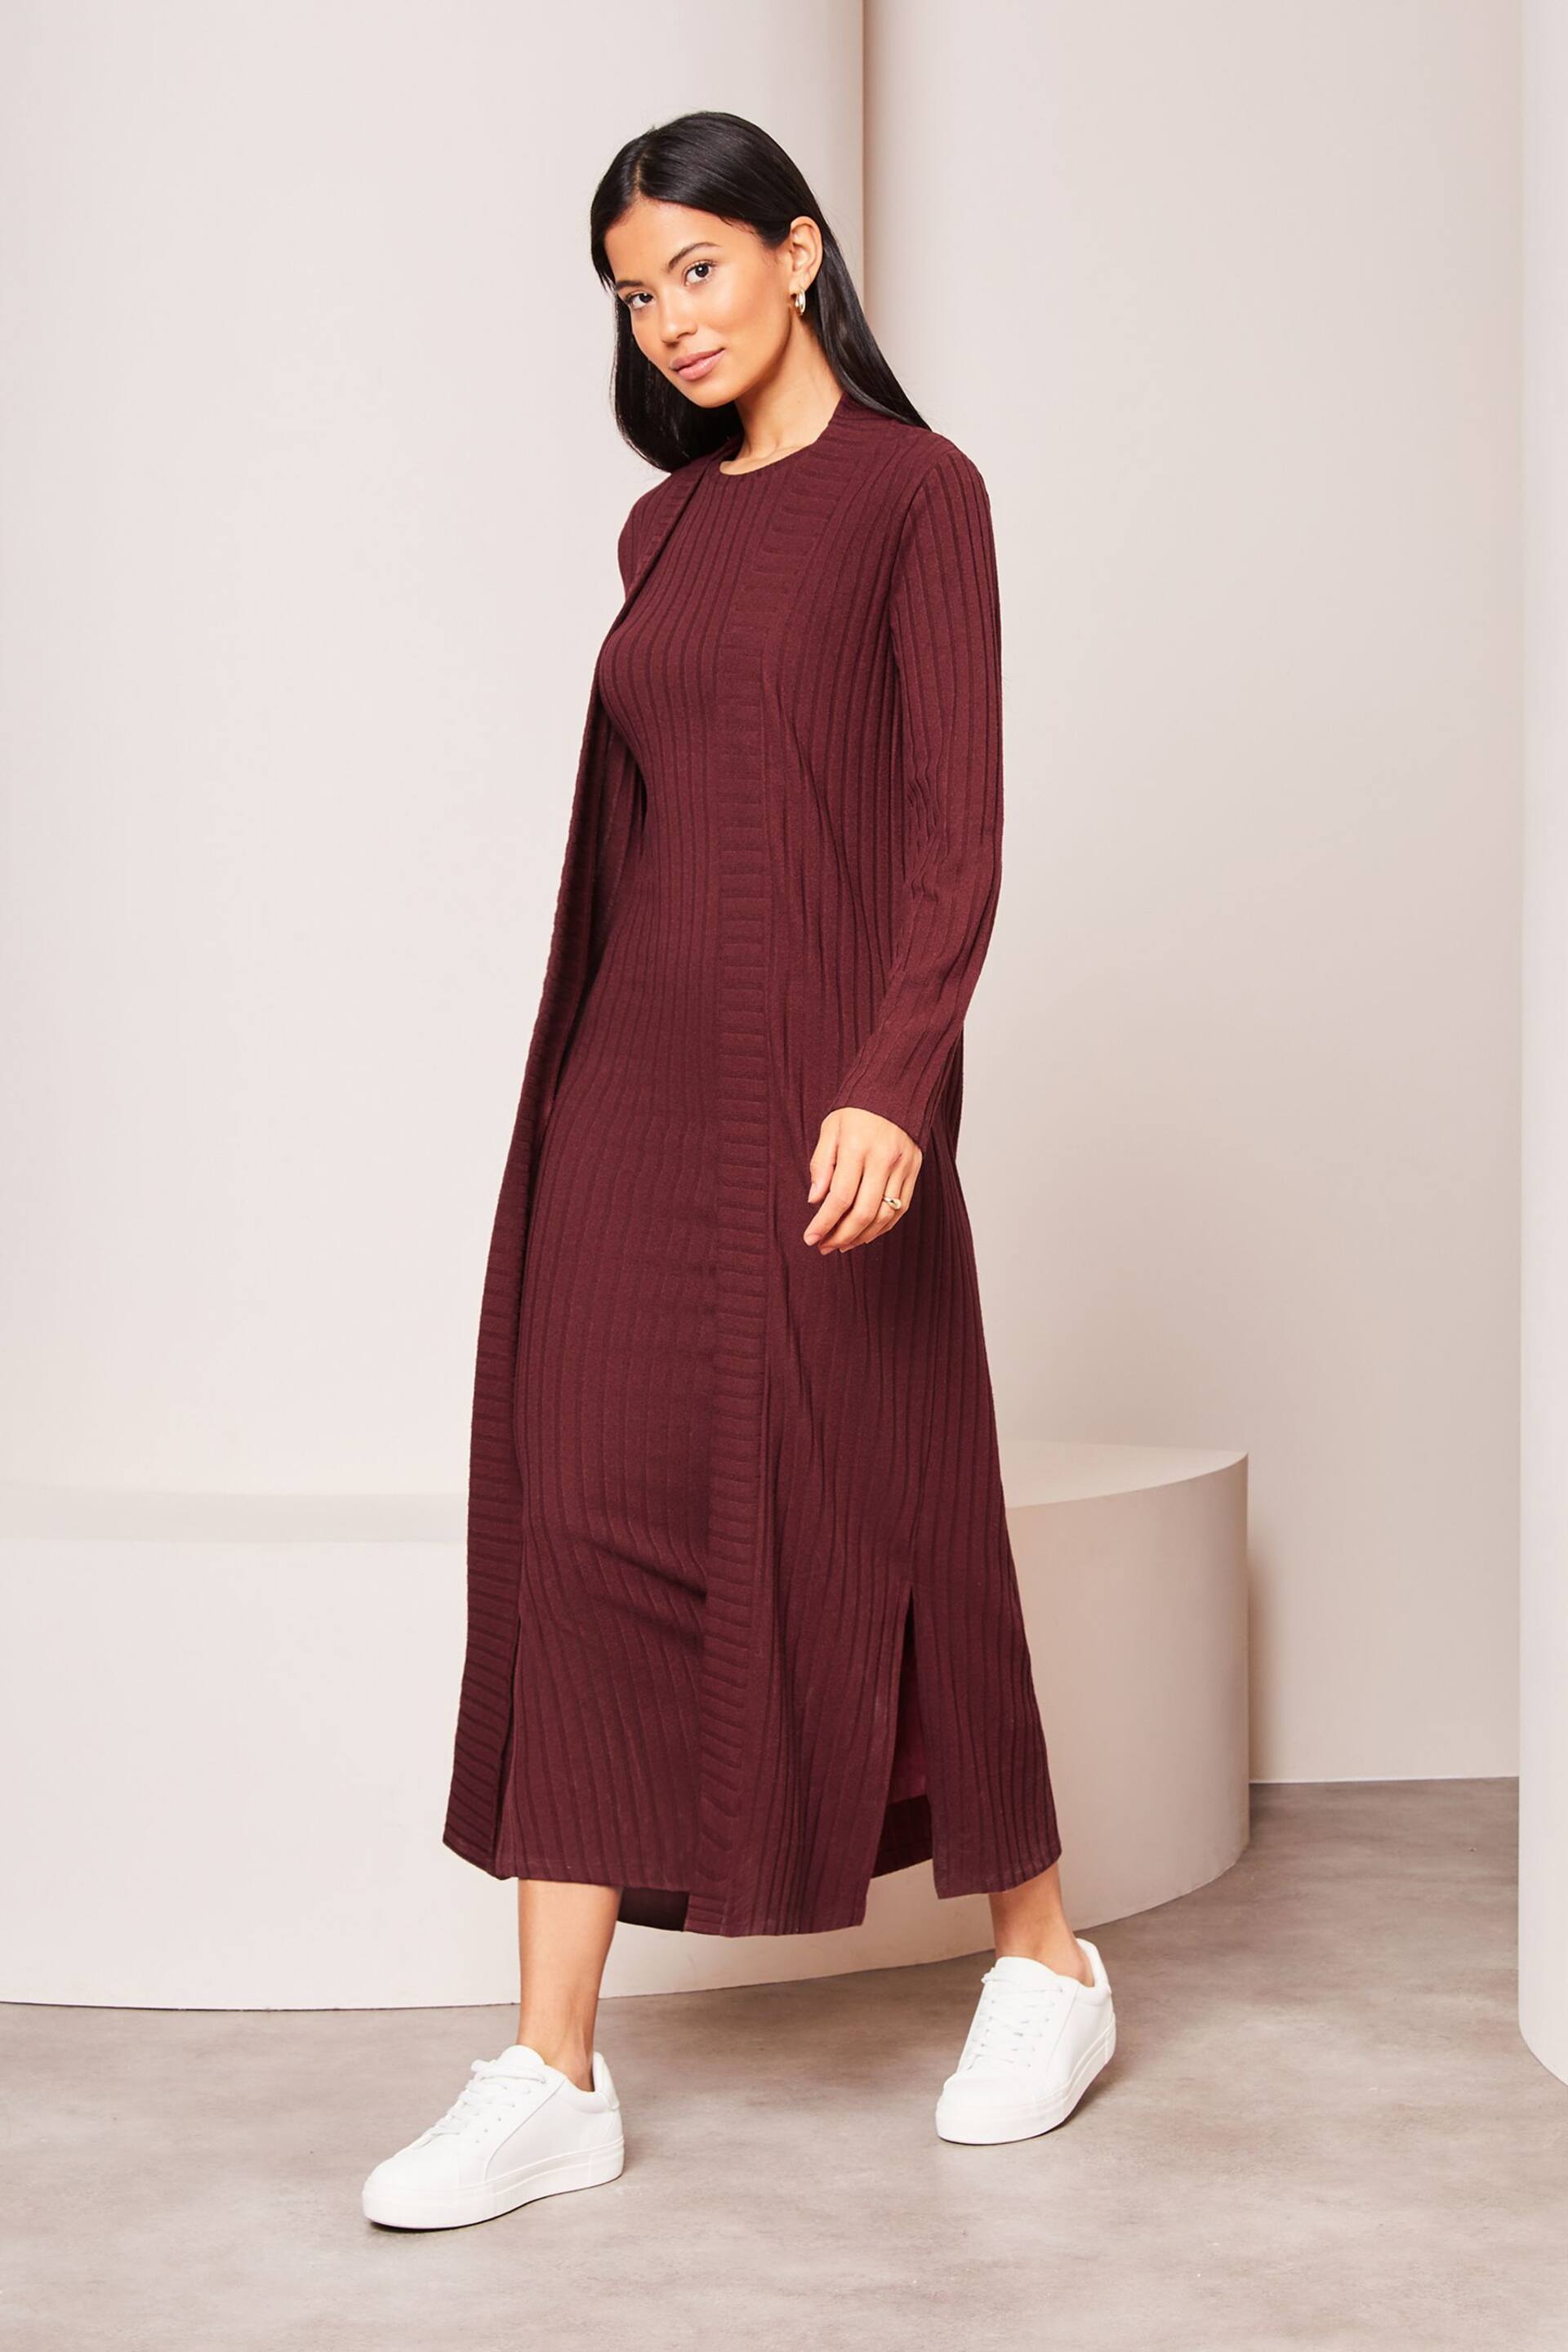 Lipsy Burgundy Red Red Long Sleeve Ribbed Cosy Longline Cardigan - Image 1 of 4